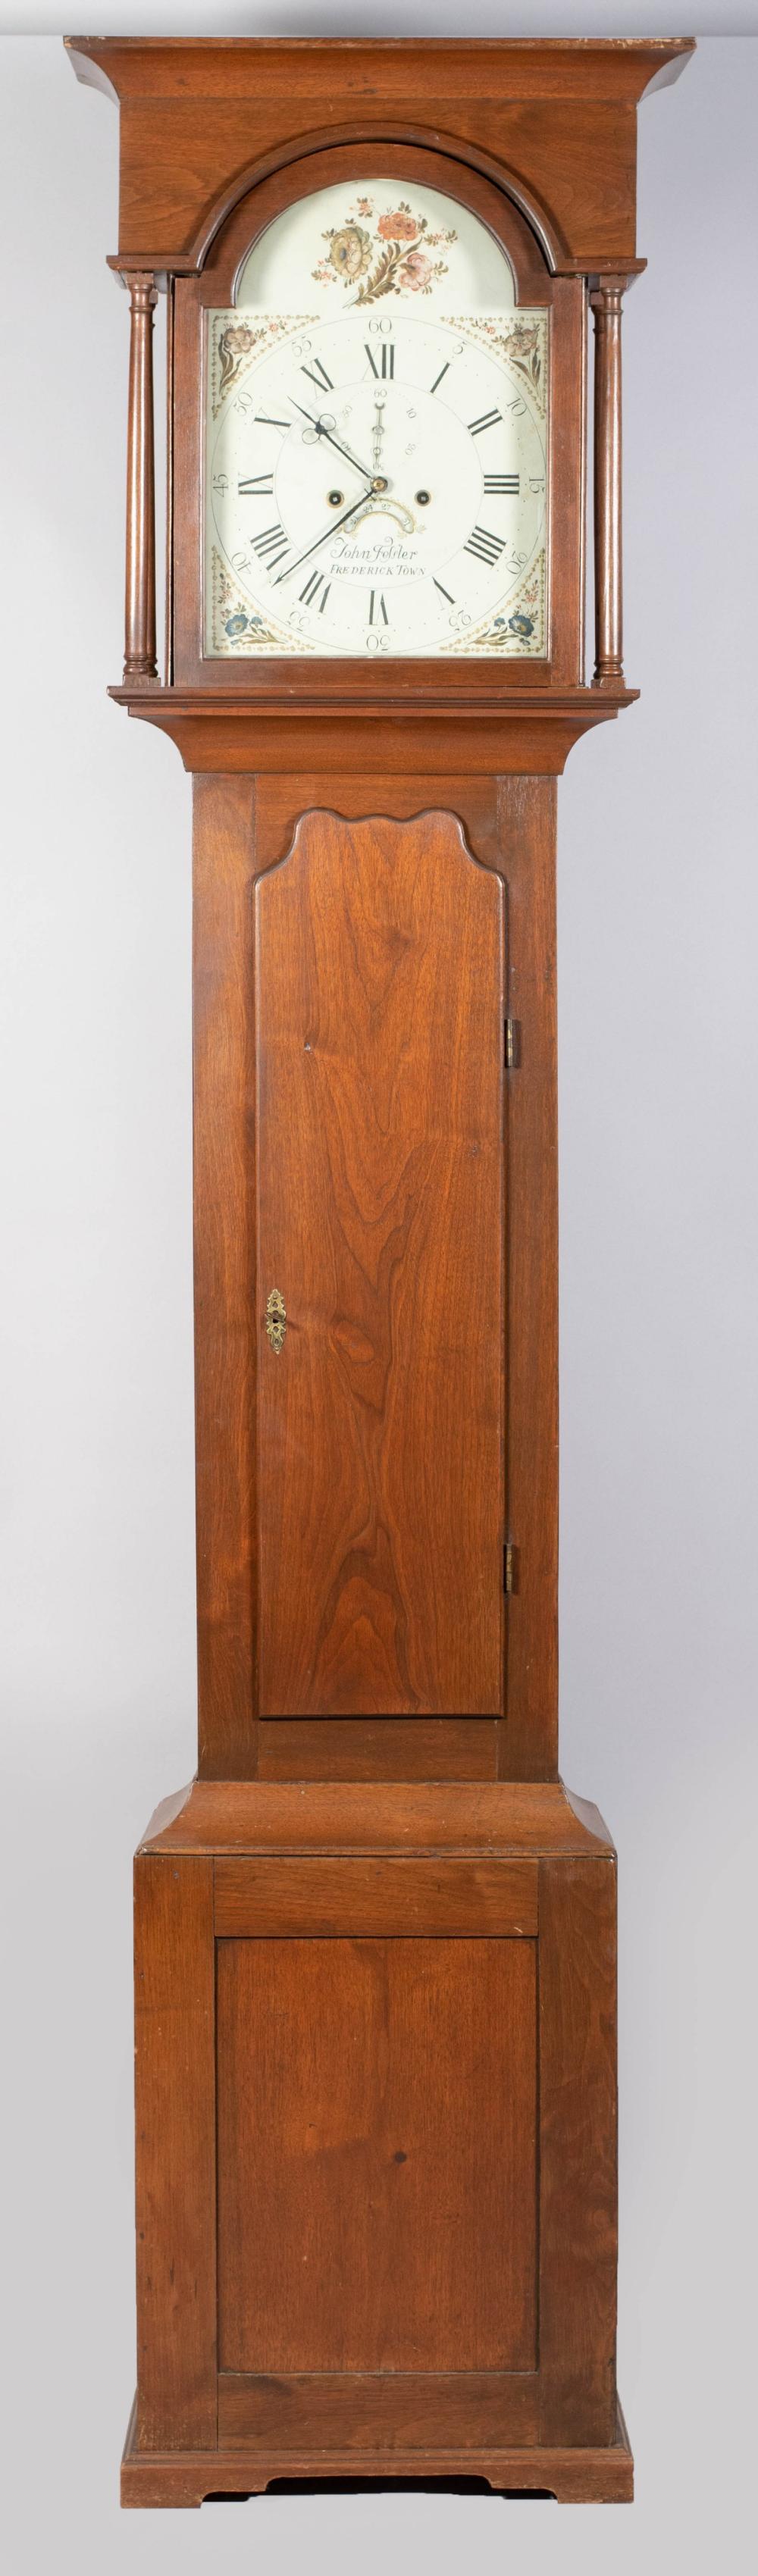 LATE CHIPPENDALE MAHOGANY TALL